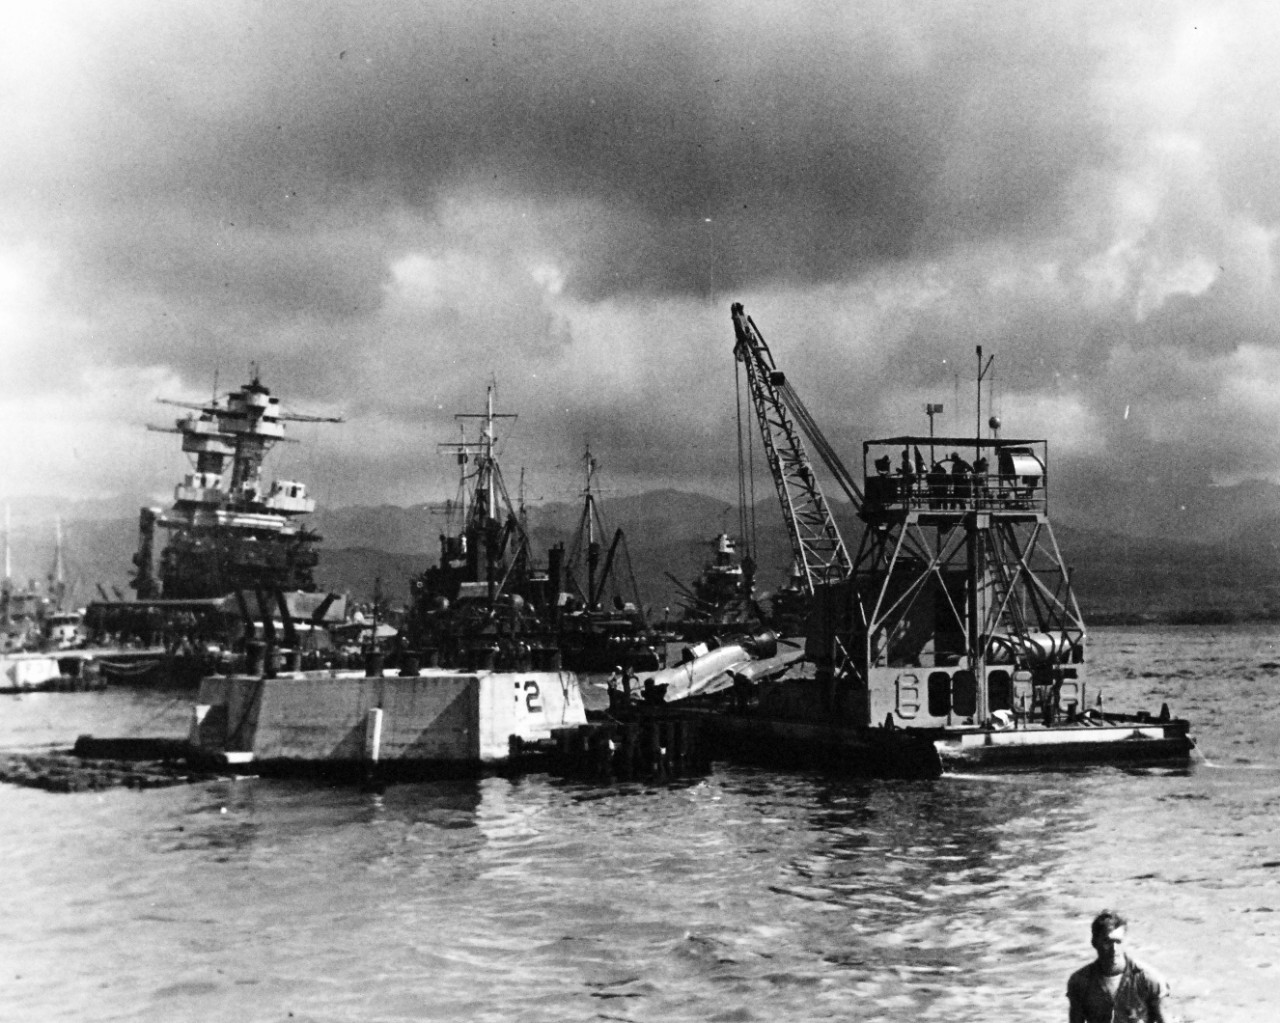 80-G-32440:  Japanese Attack on Pearl Harbor, December 7, 1941.  Salvaging Japanese Navy Type 99 Carrier Bombers (Vals) from the water at Pearl Harbor. Official U.S. Navy photograph, now in the collections of the National Archives.   (9/15/15).